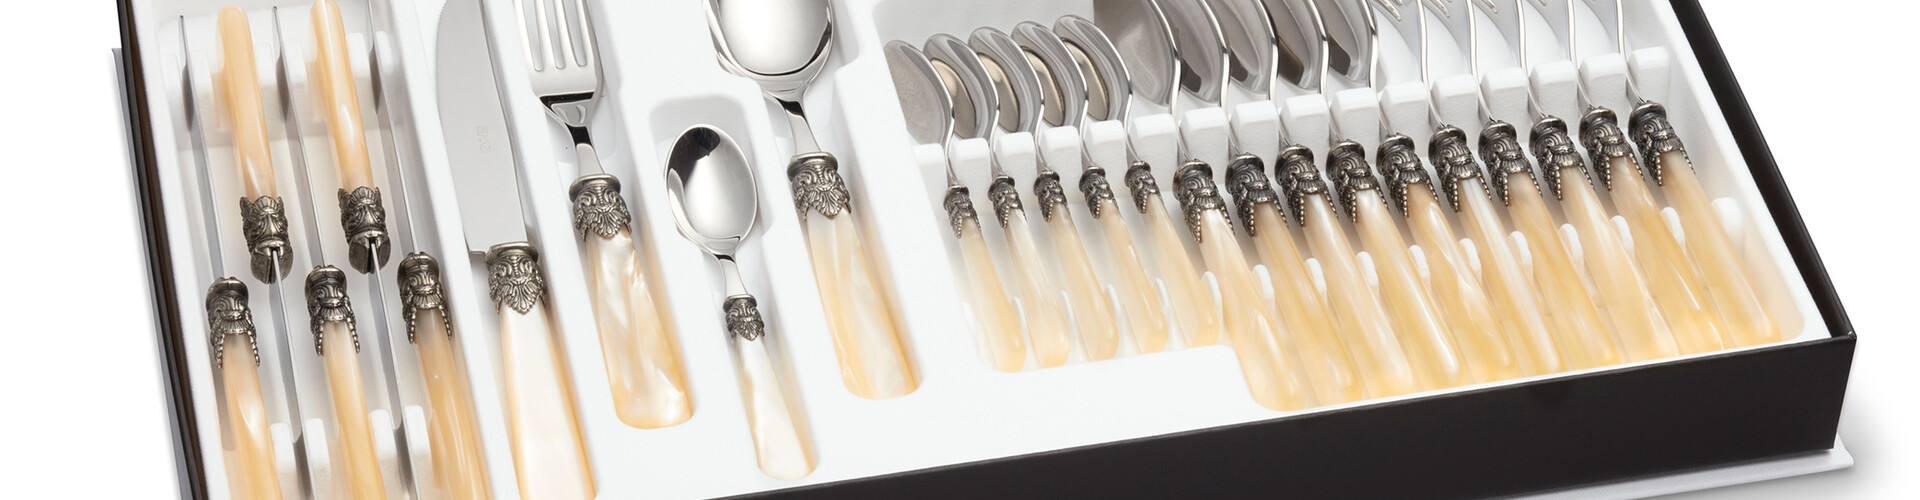  24-piece Cutlery Set for 6 Persons